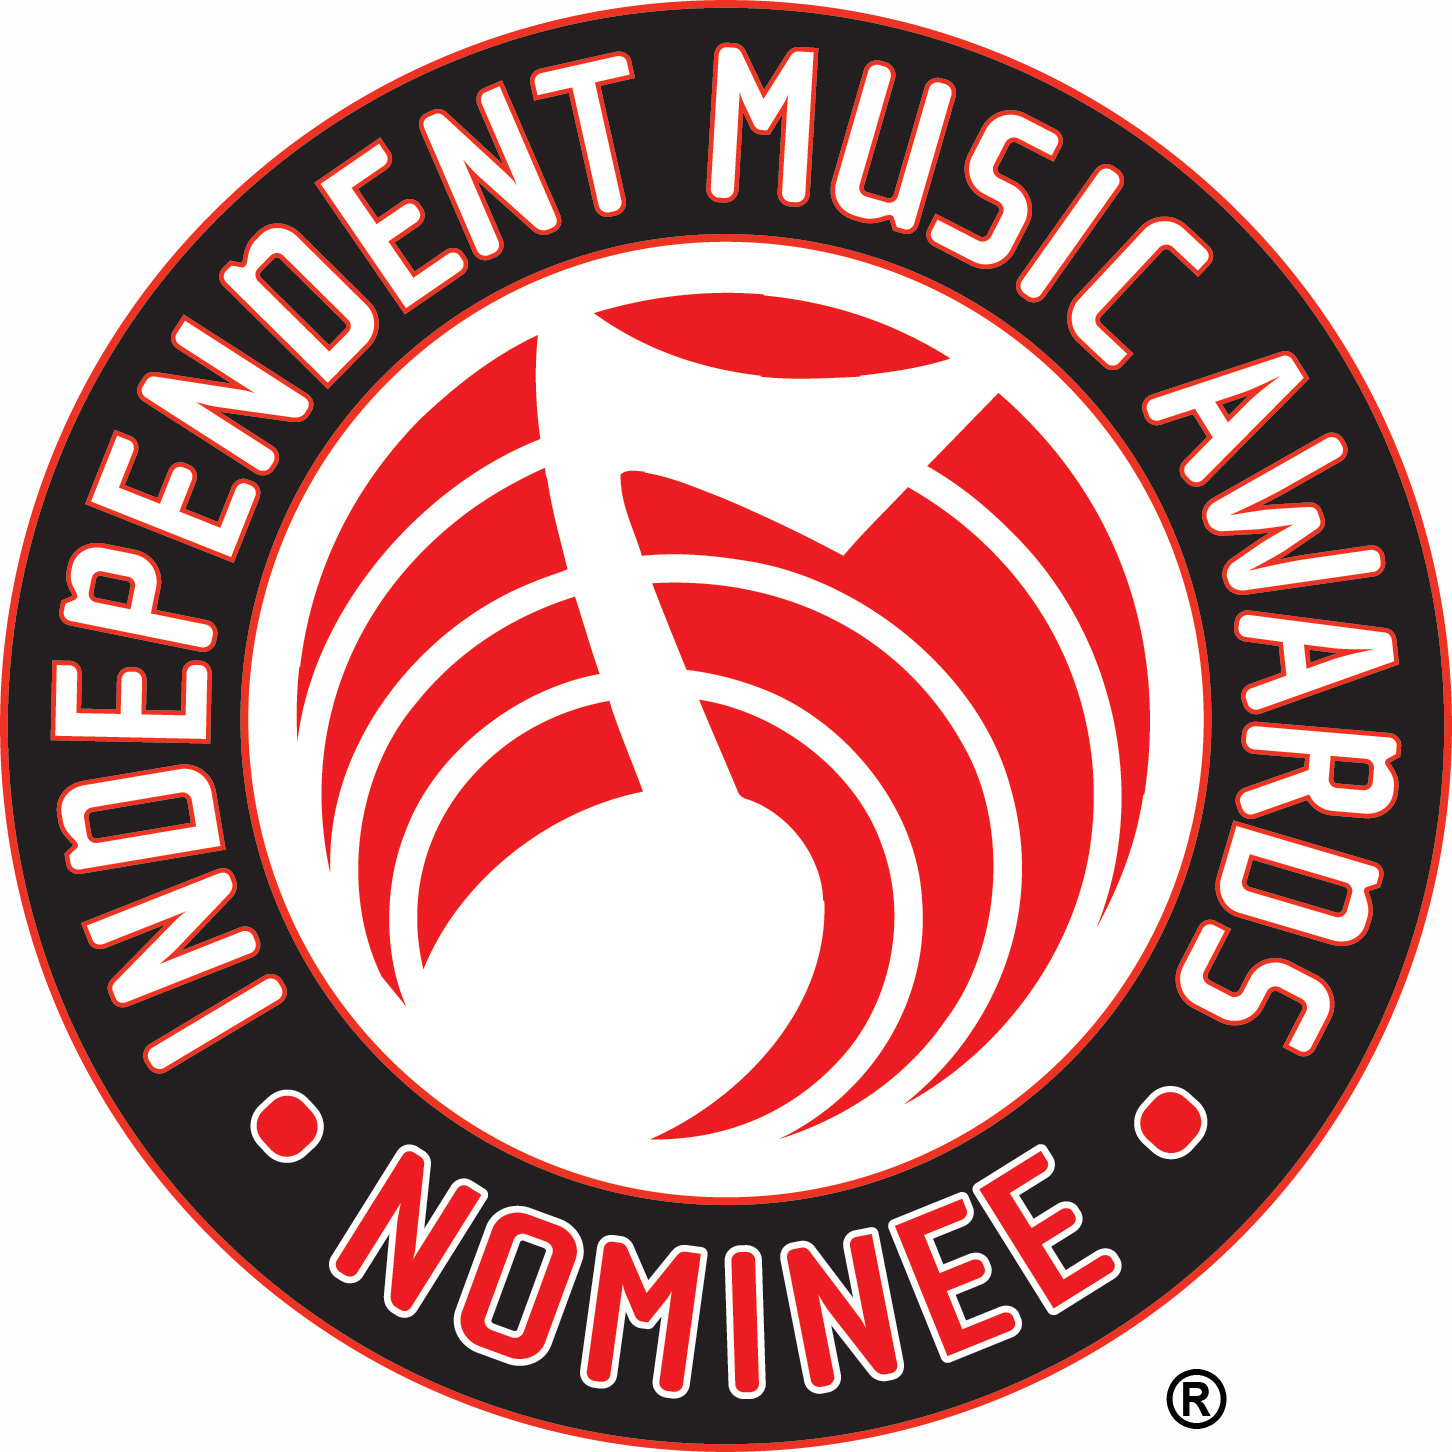 N2L Recording Artist Mighty Men of Faith Nominated for Independent Music  Award - PR.com